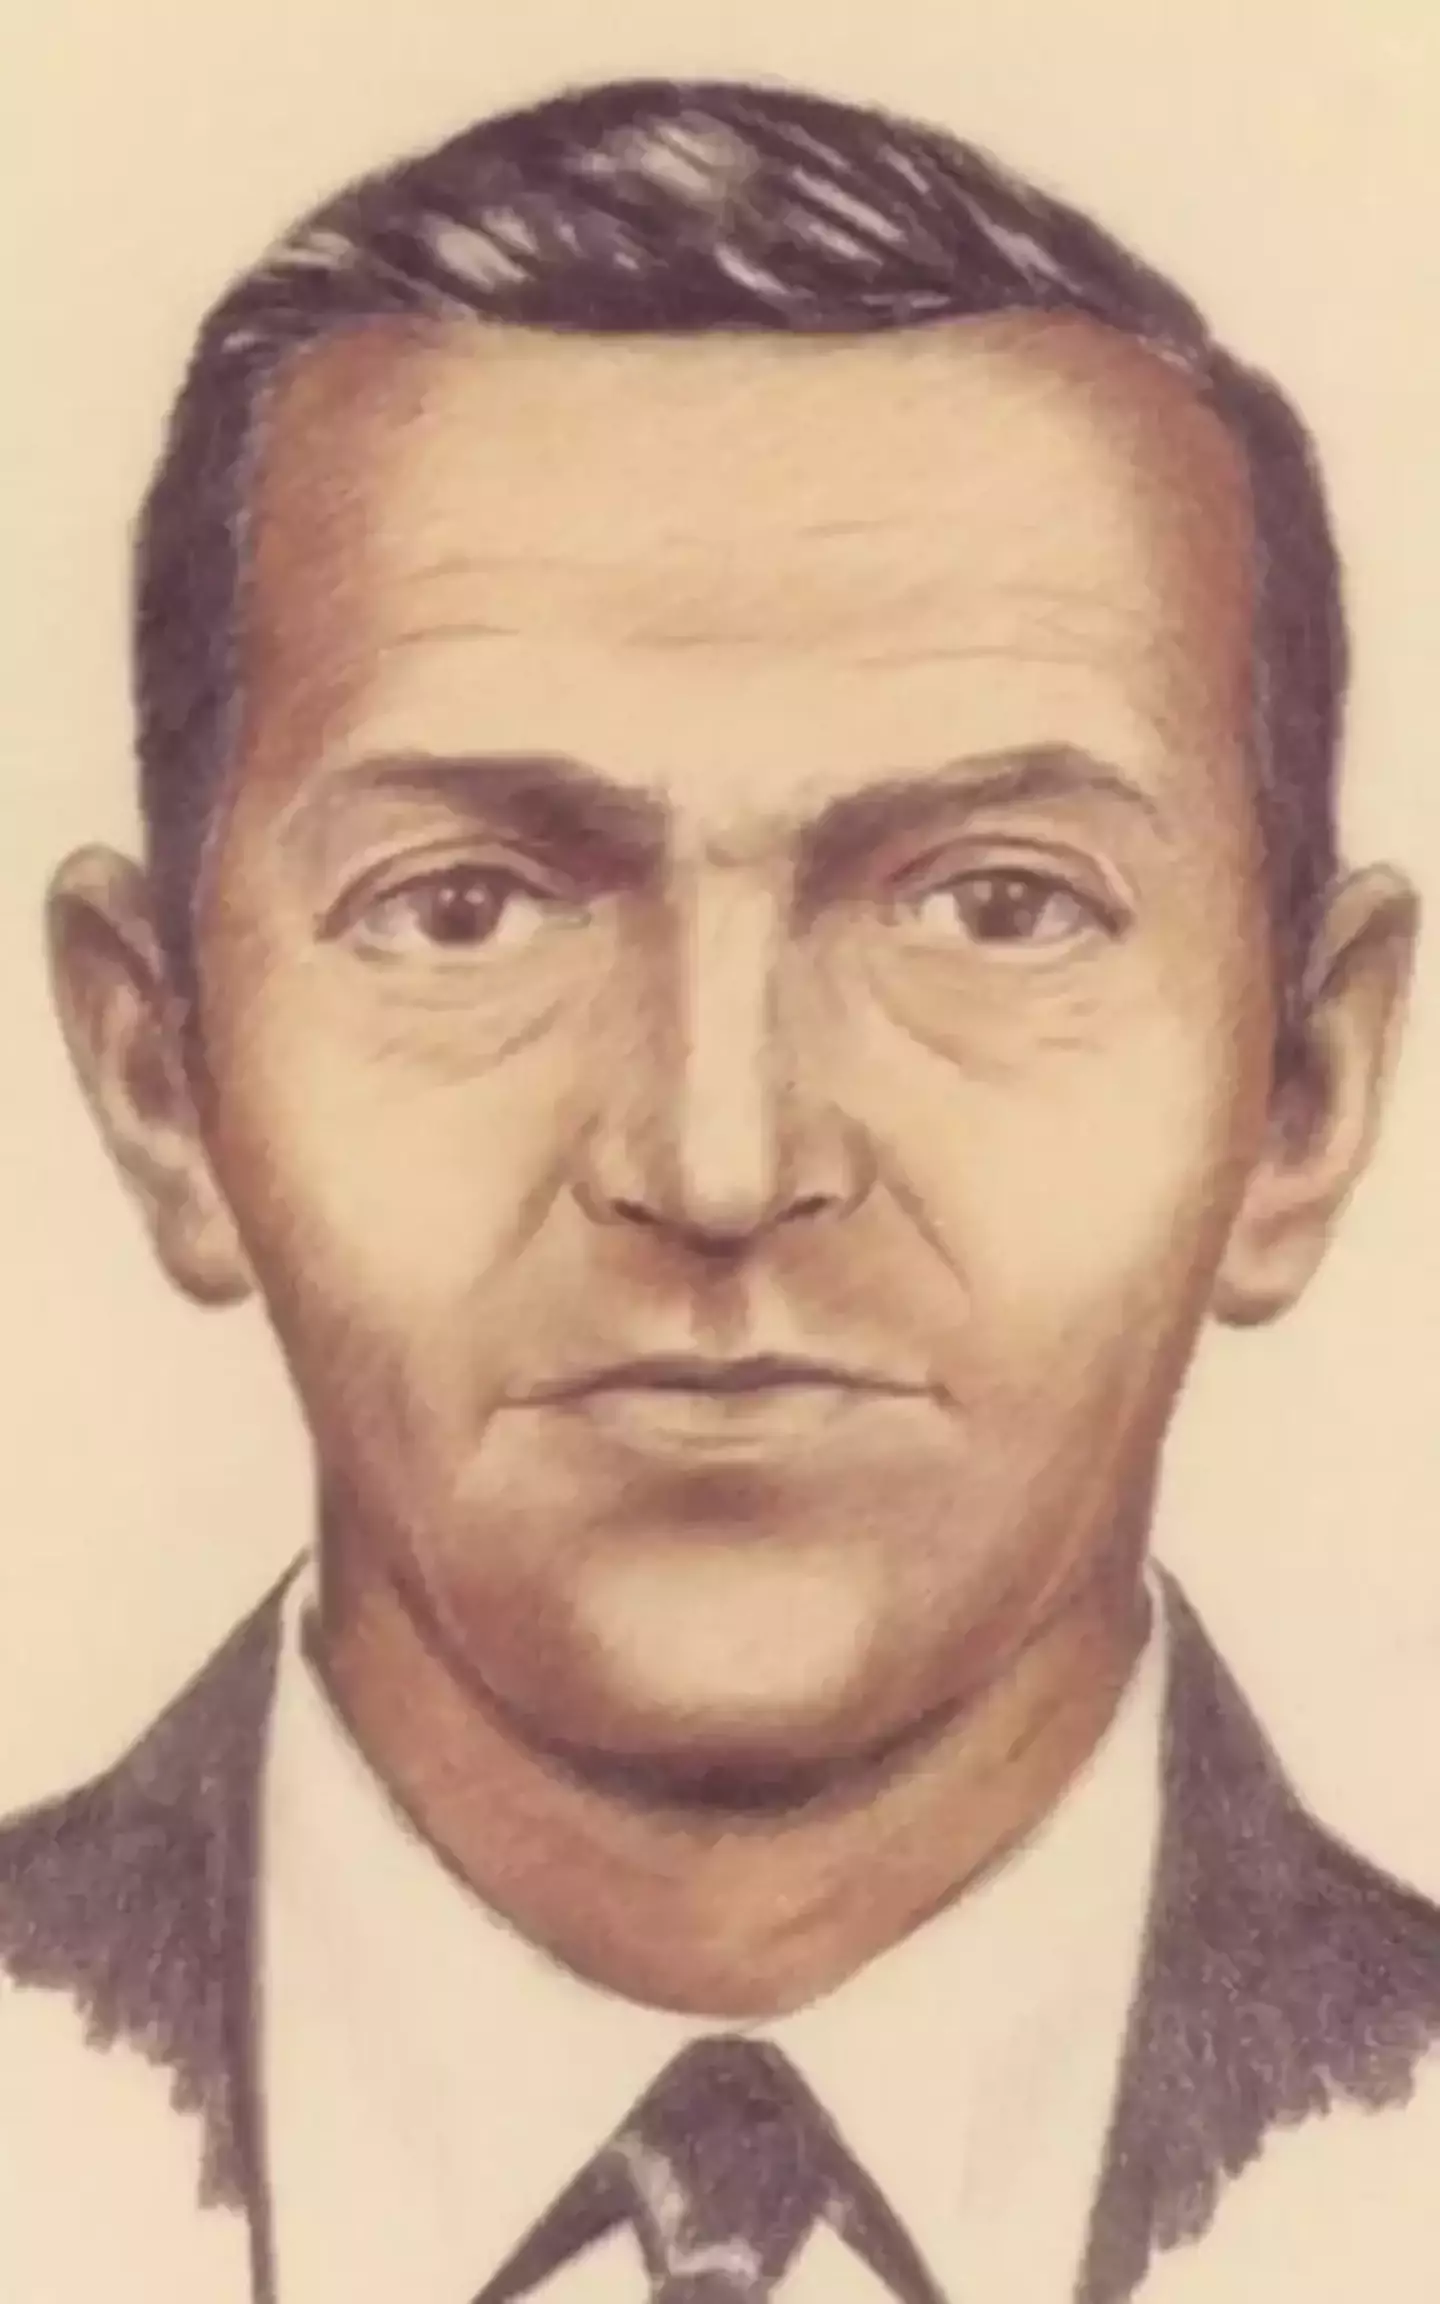 Ever since he disappeared in 1971, people have wondered exactly who DB Cooper was.